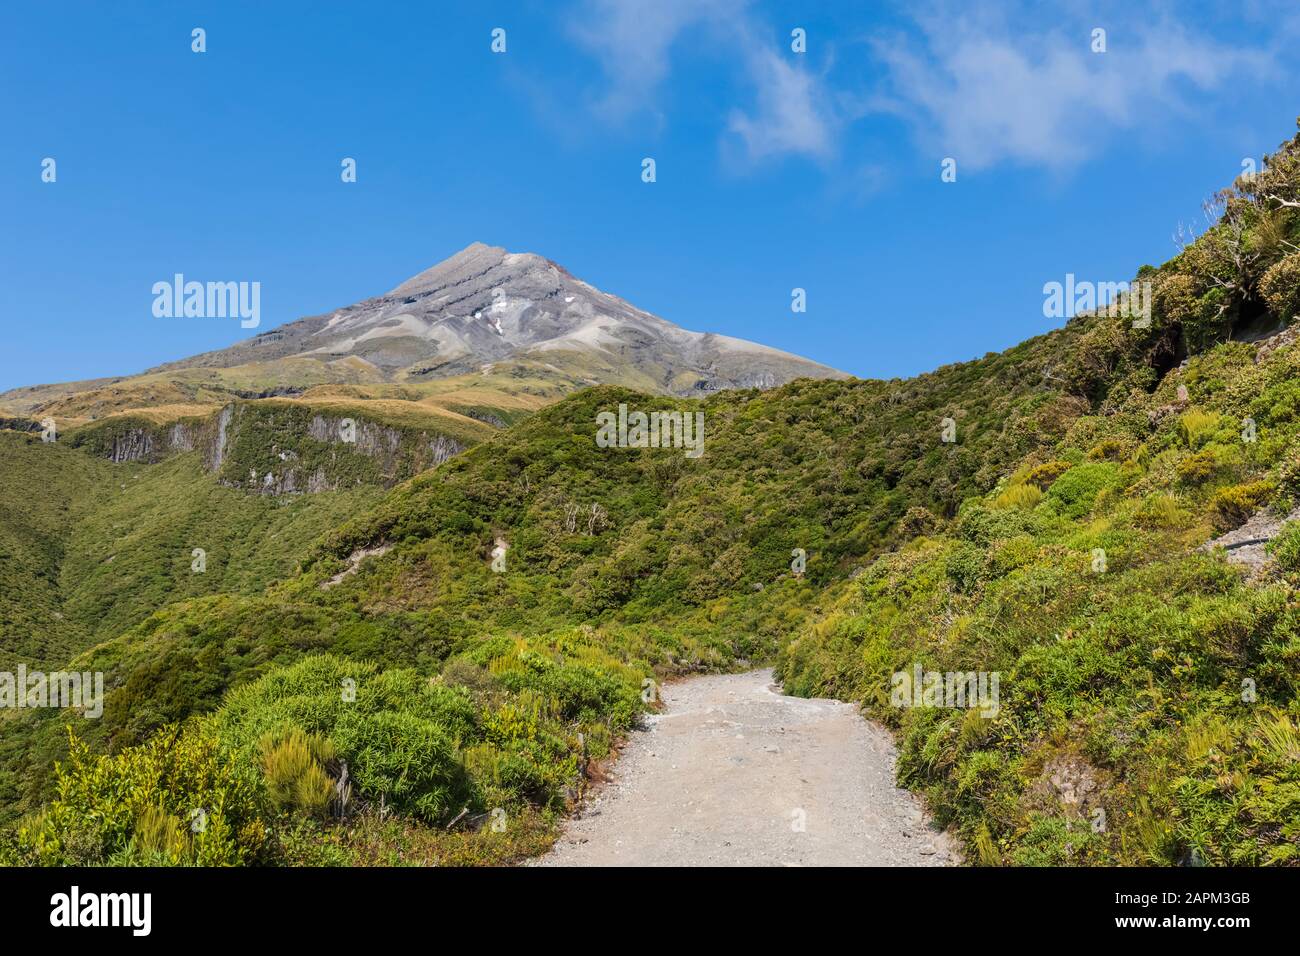 New Zealand, Scenic view of Mount Taranaki volcano and surrounding forest in spring Stock Photo